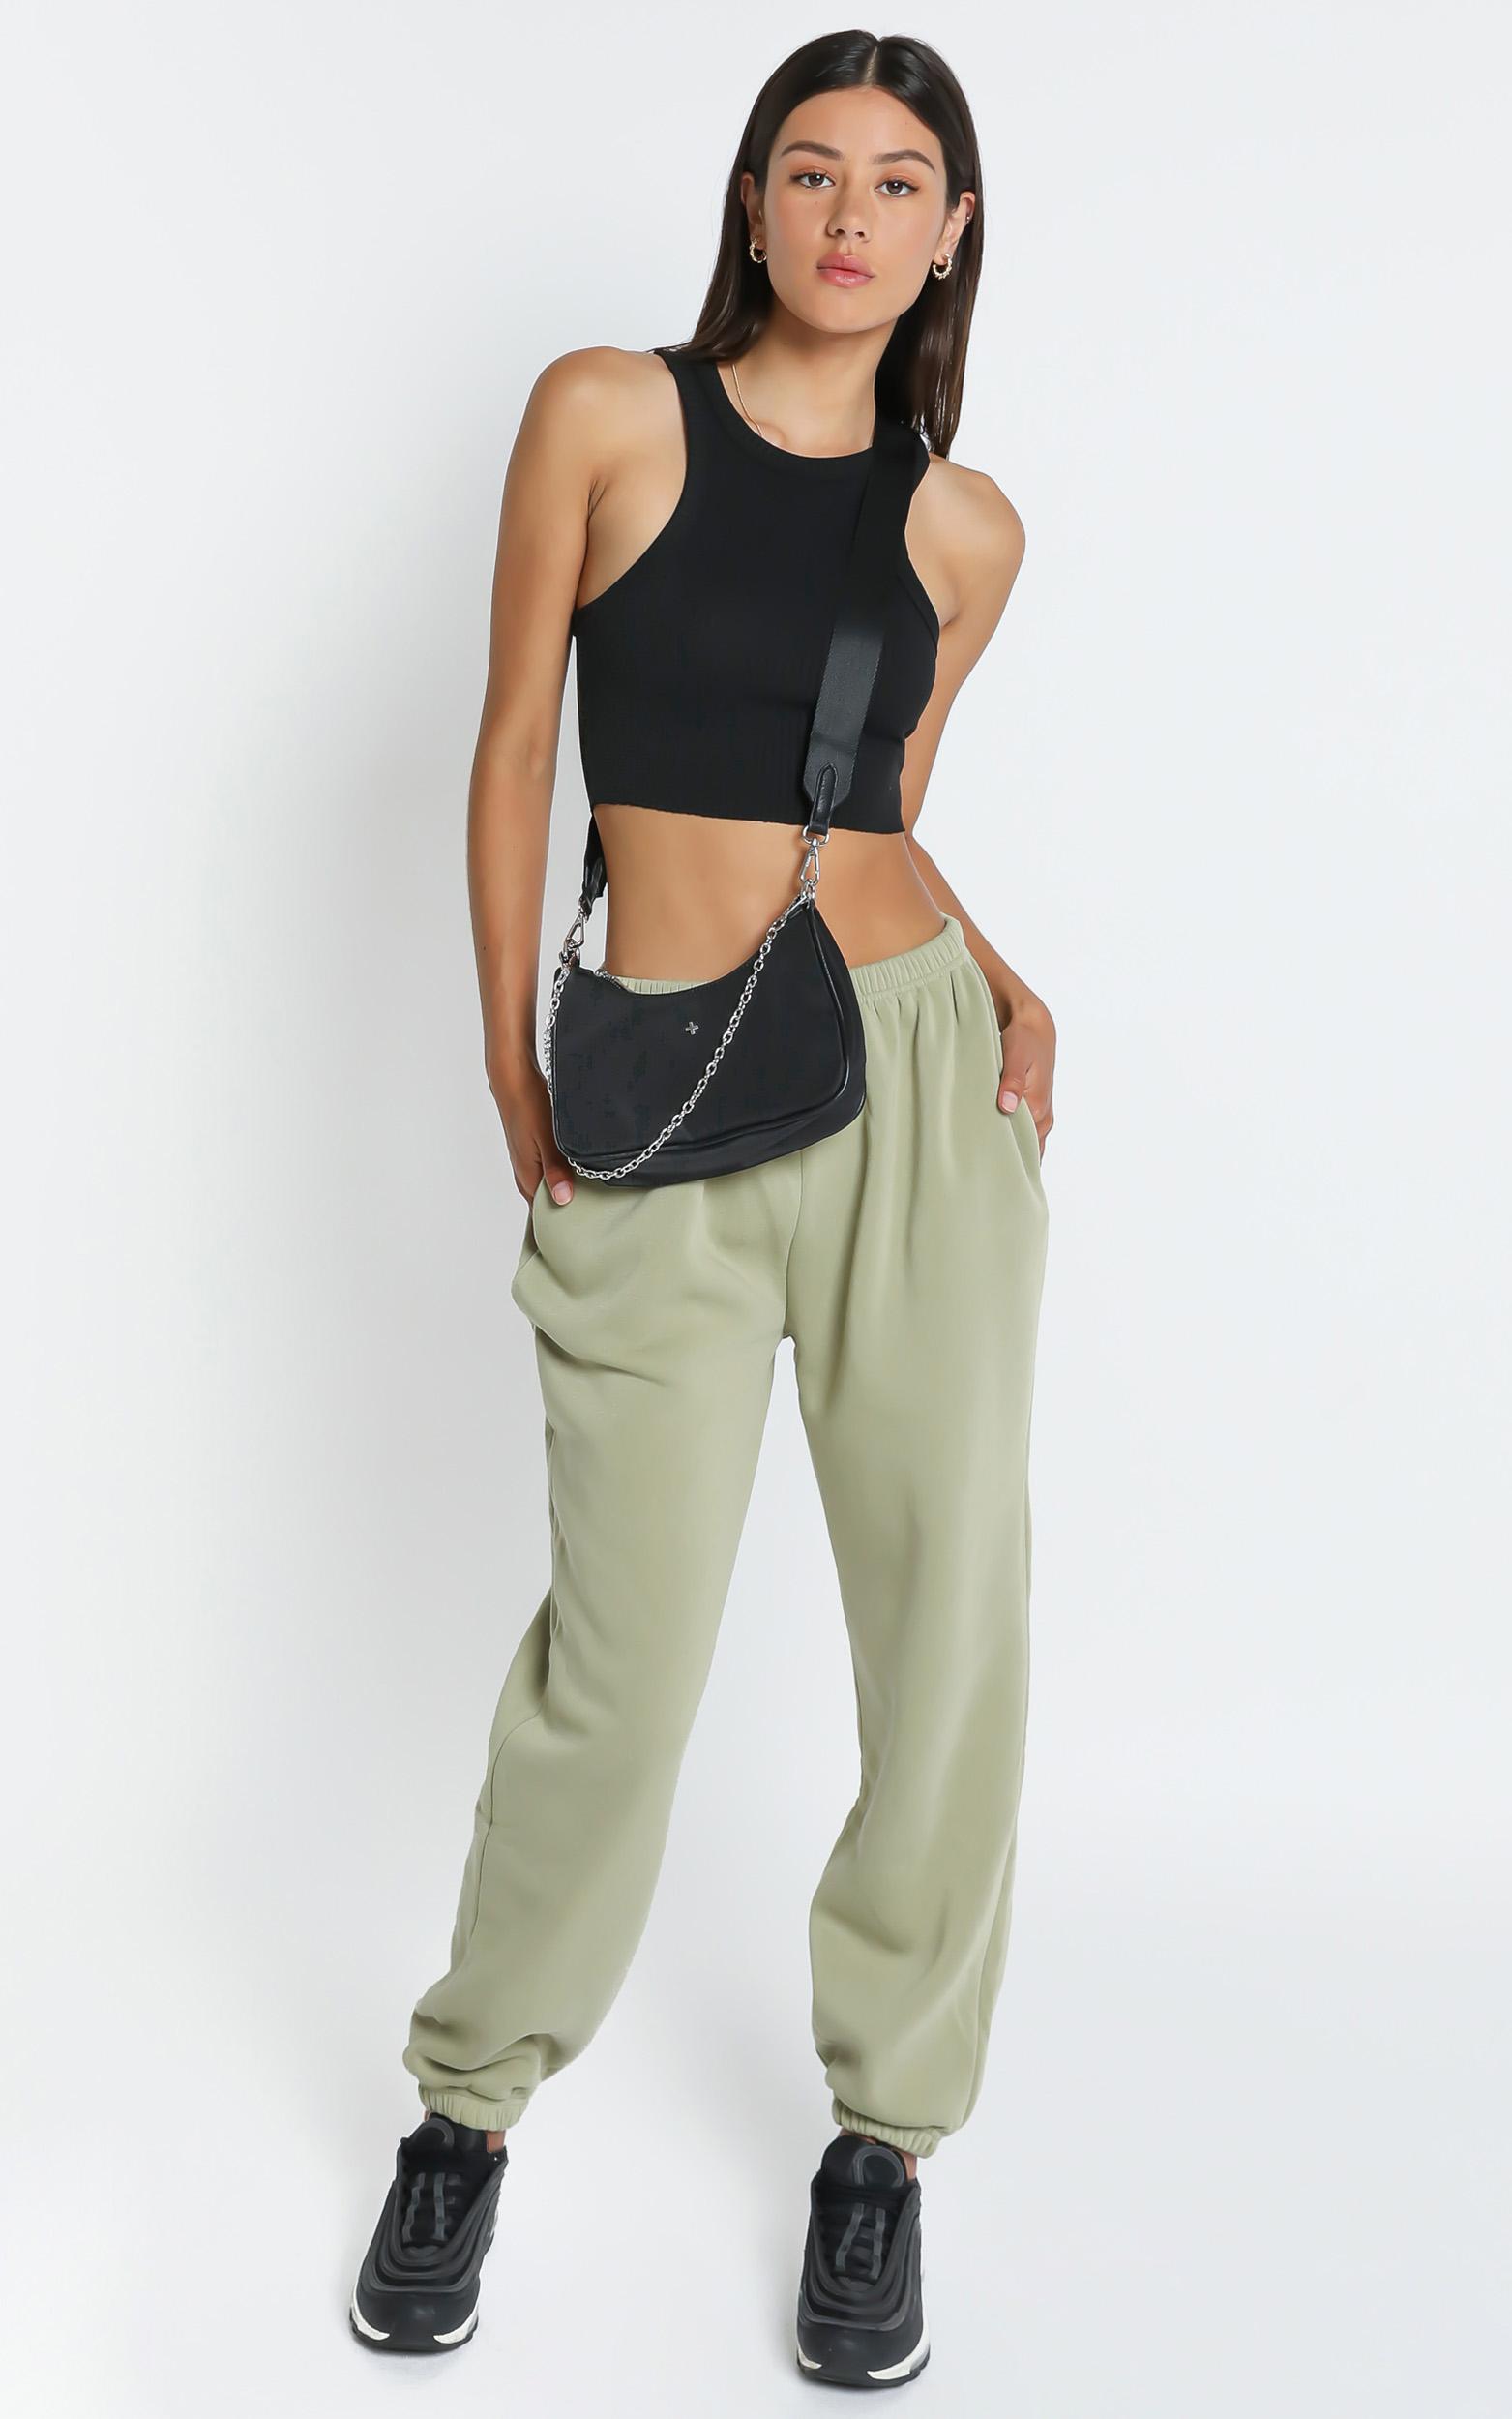 Lioness - Academy Sweatpants in Sage - 04, GRN2, hi-res image number null